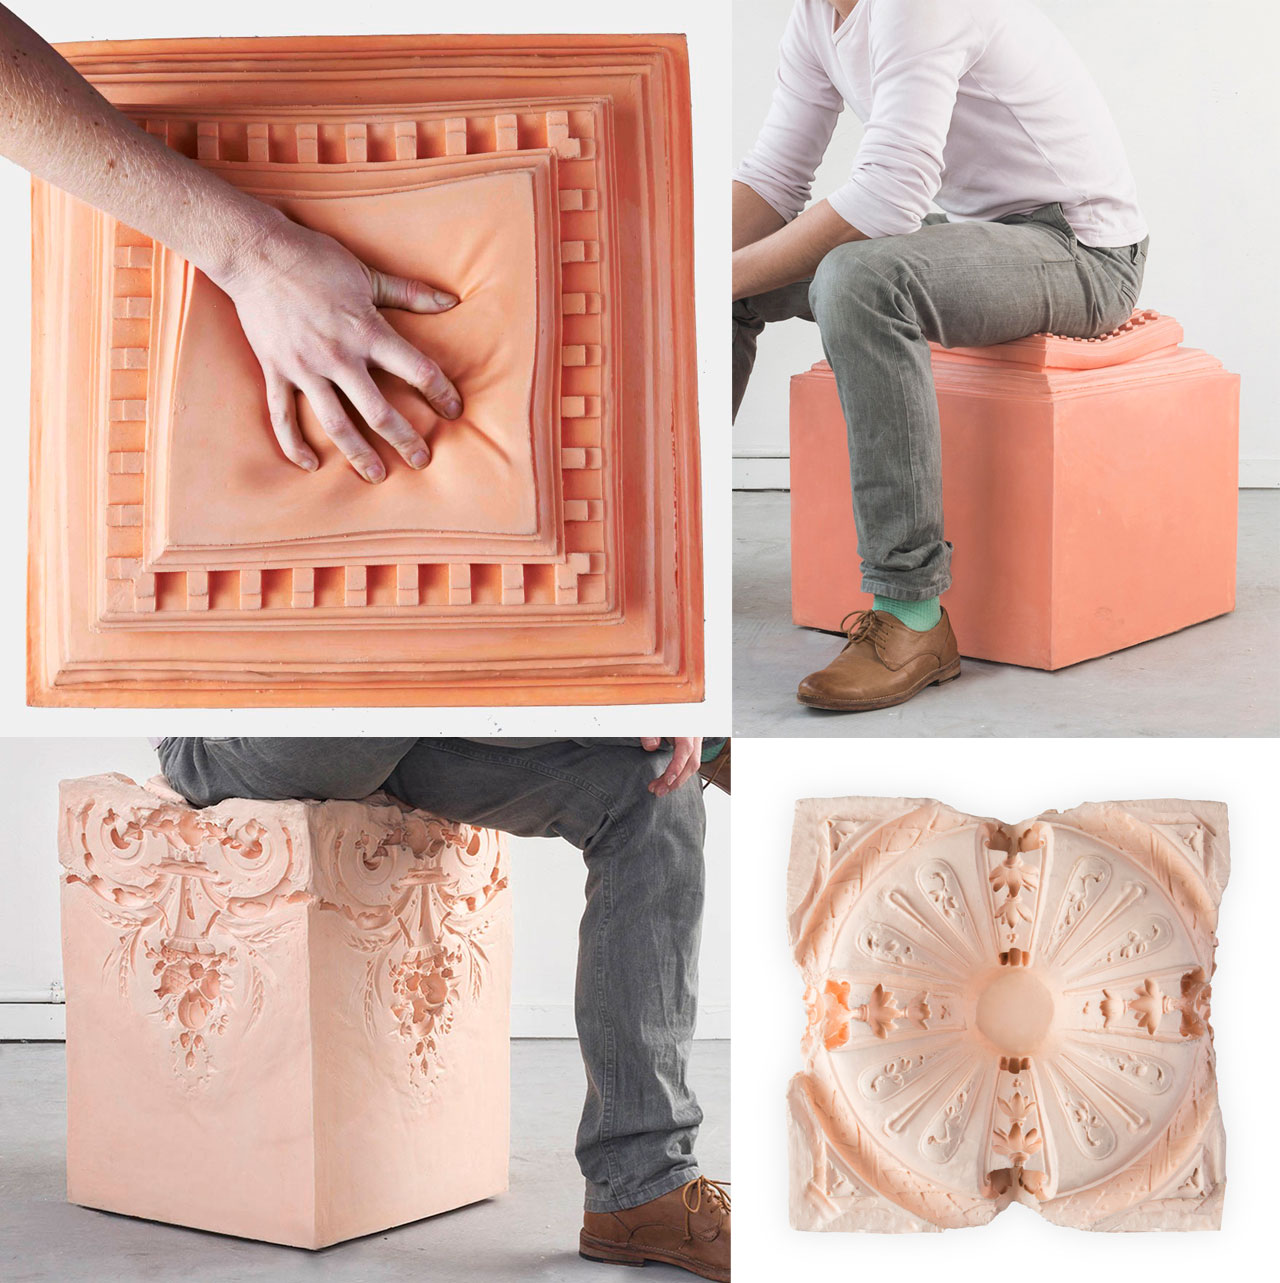 "Elements of Time" series of furniture by Nynke Koster. H 50 x W 39 x D 39 cm / Foam with rubber, Frame of wood.